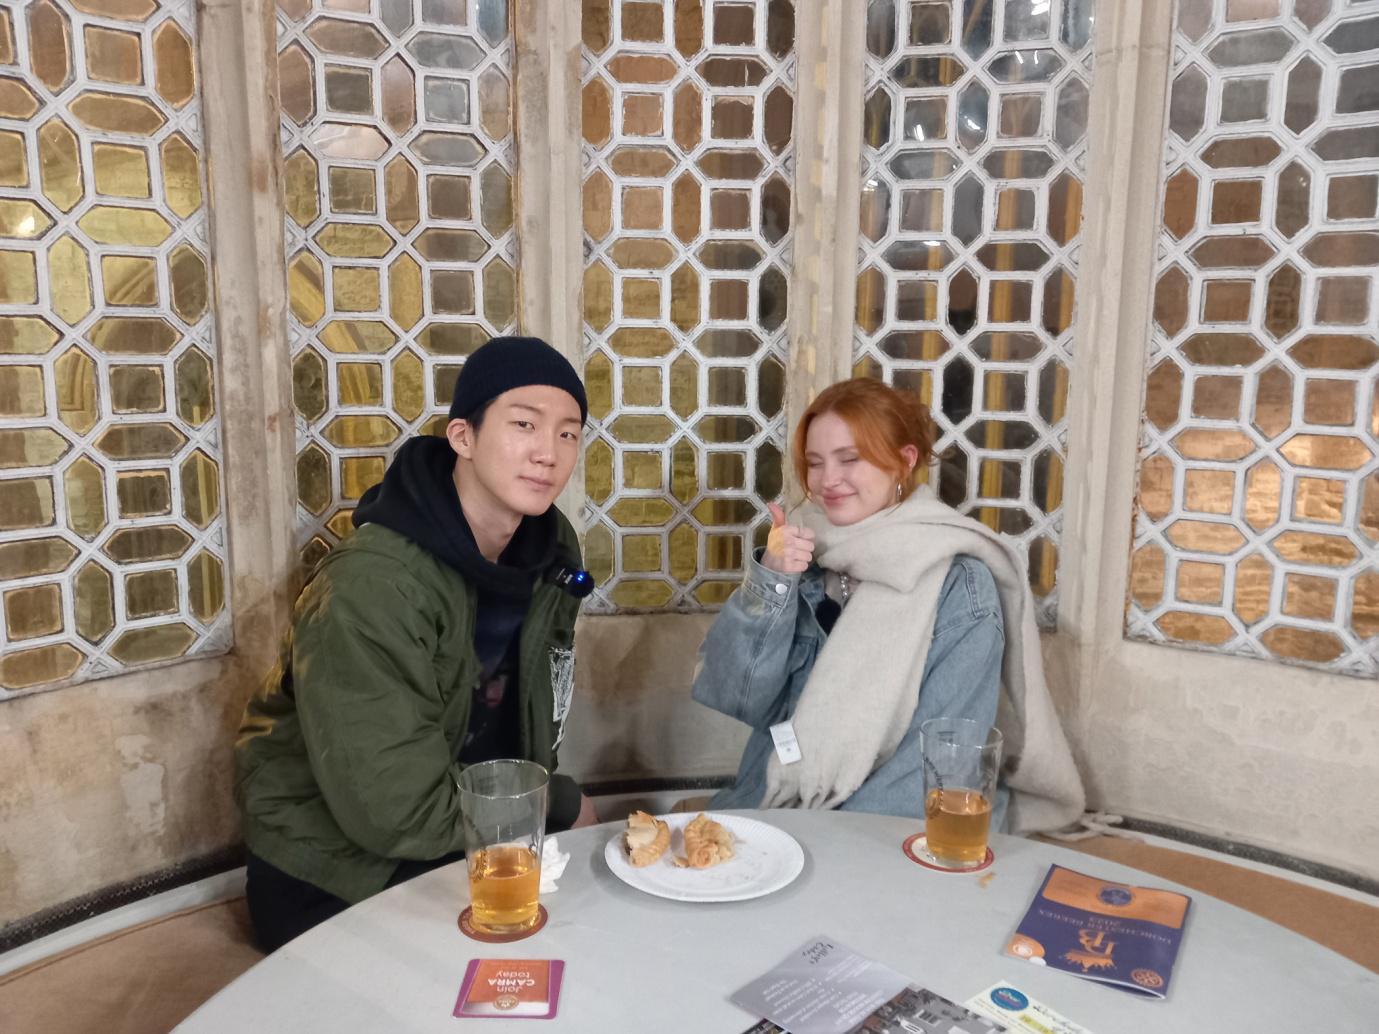 Korean star Lee Seung Hoon and Youtuber Emily enjoy Cerne Abbas Ale and a pasty (photo credit: Rich Gabe)